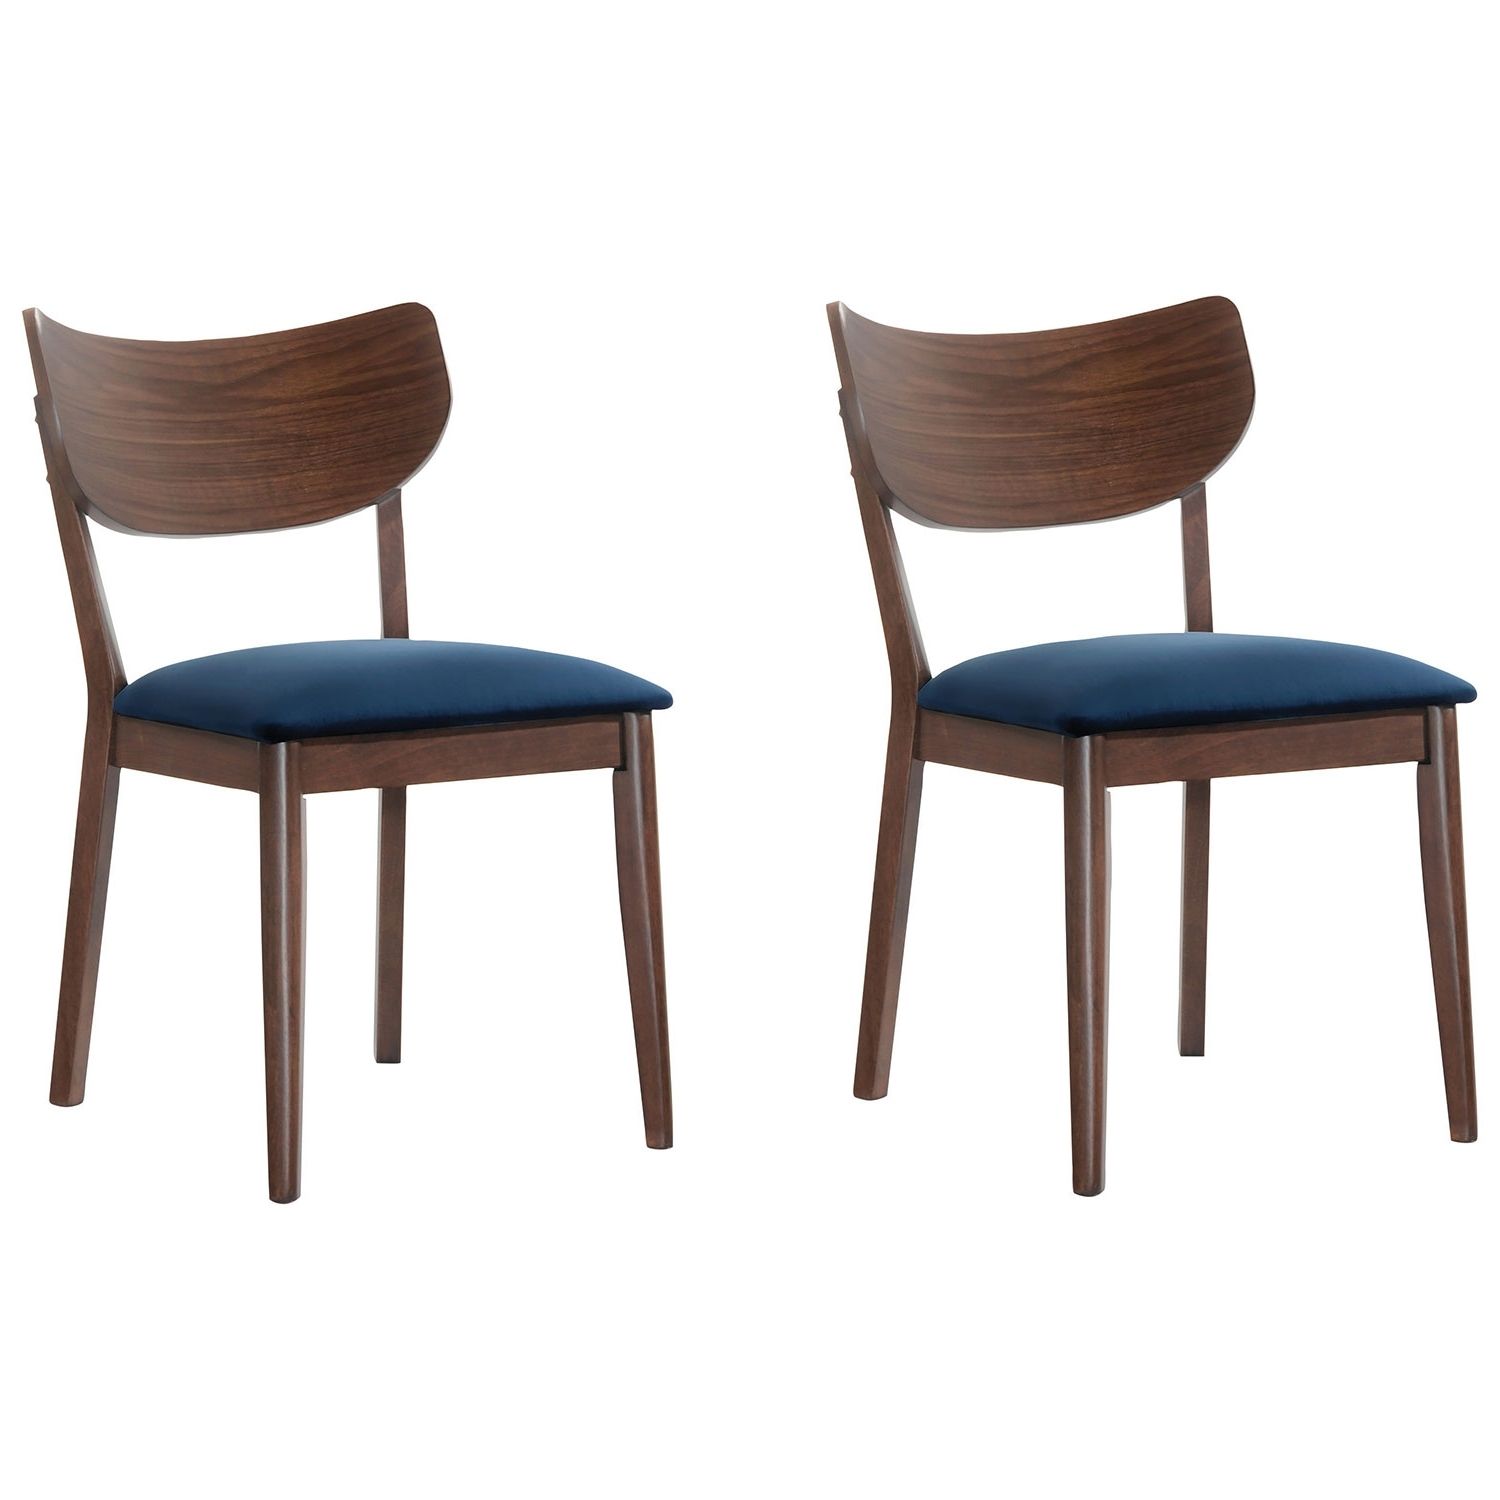 Widely Used Dining Chairs: Leather, Modern, Contemporary & More – Best Buy Canada Inside Cole Ii Black Side Chairs (View 5 of 20)